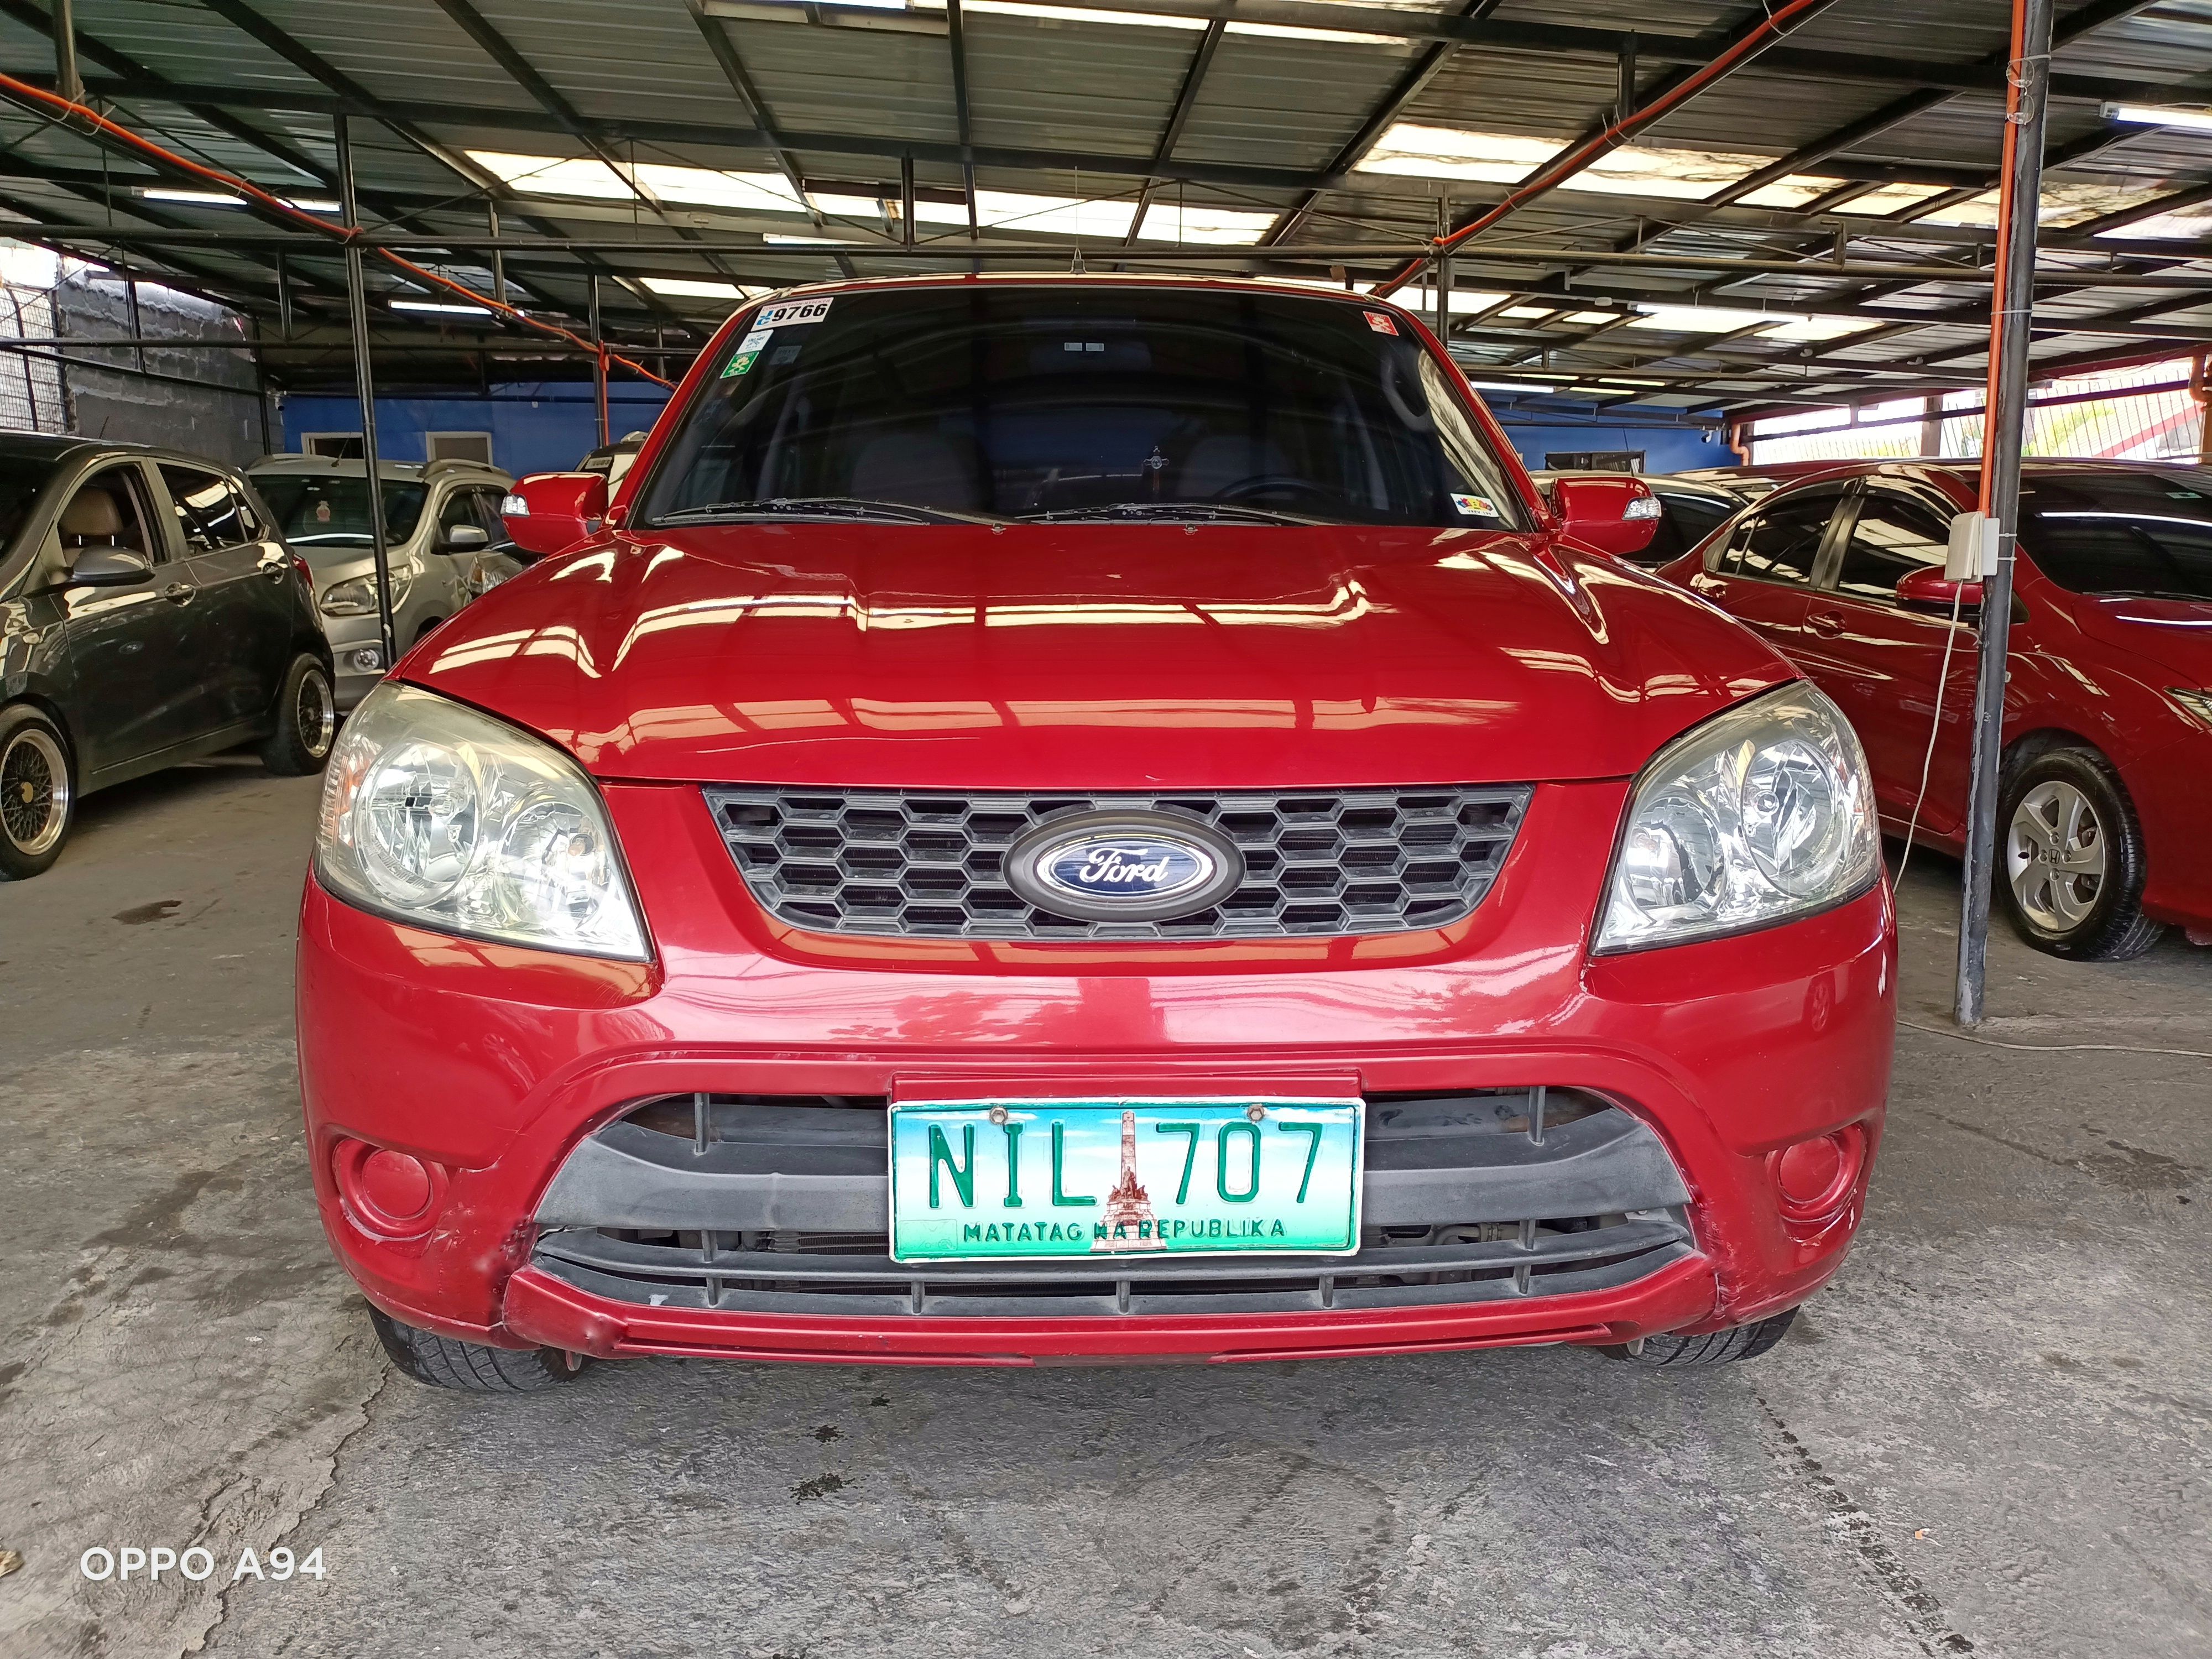 Used 2010 Ford Escape 2.3L XLS AT